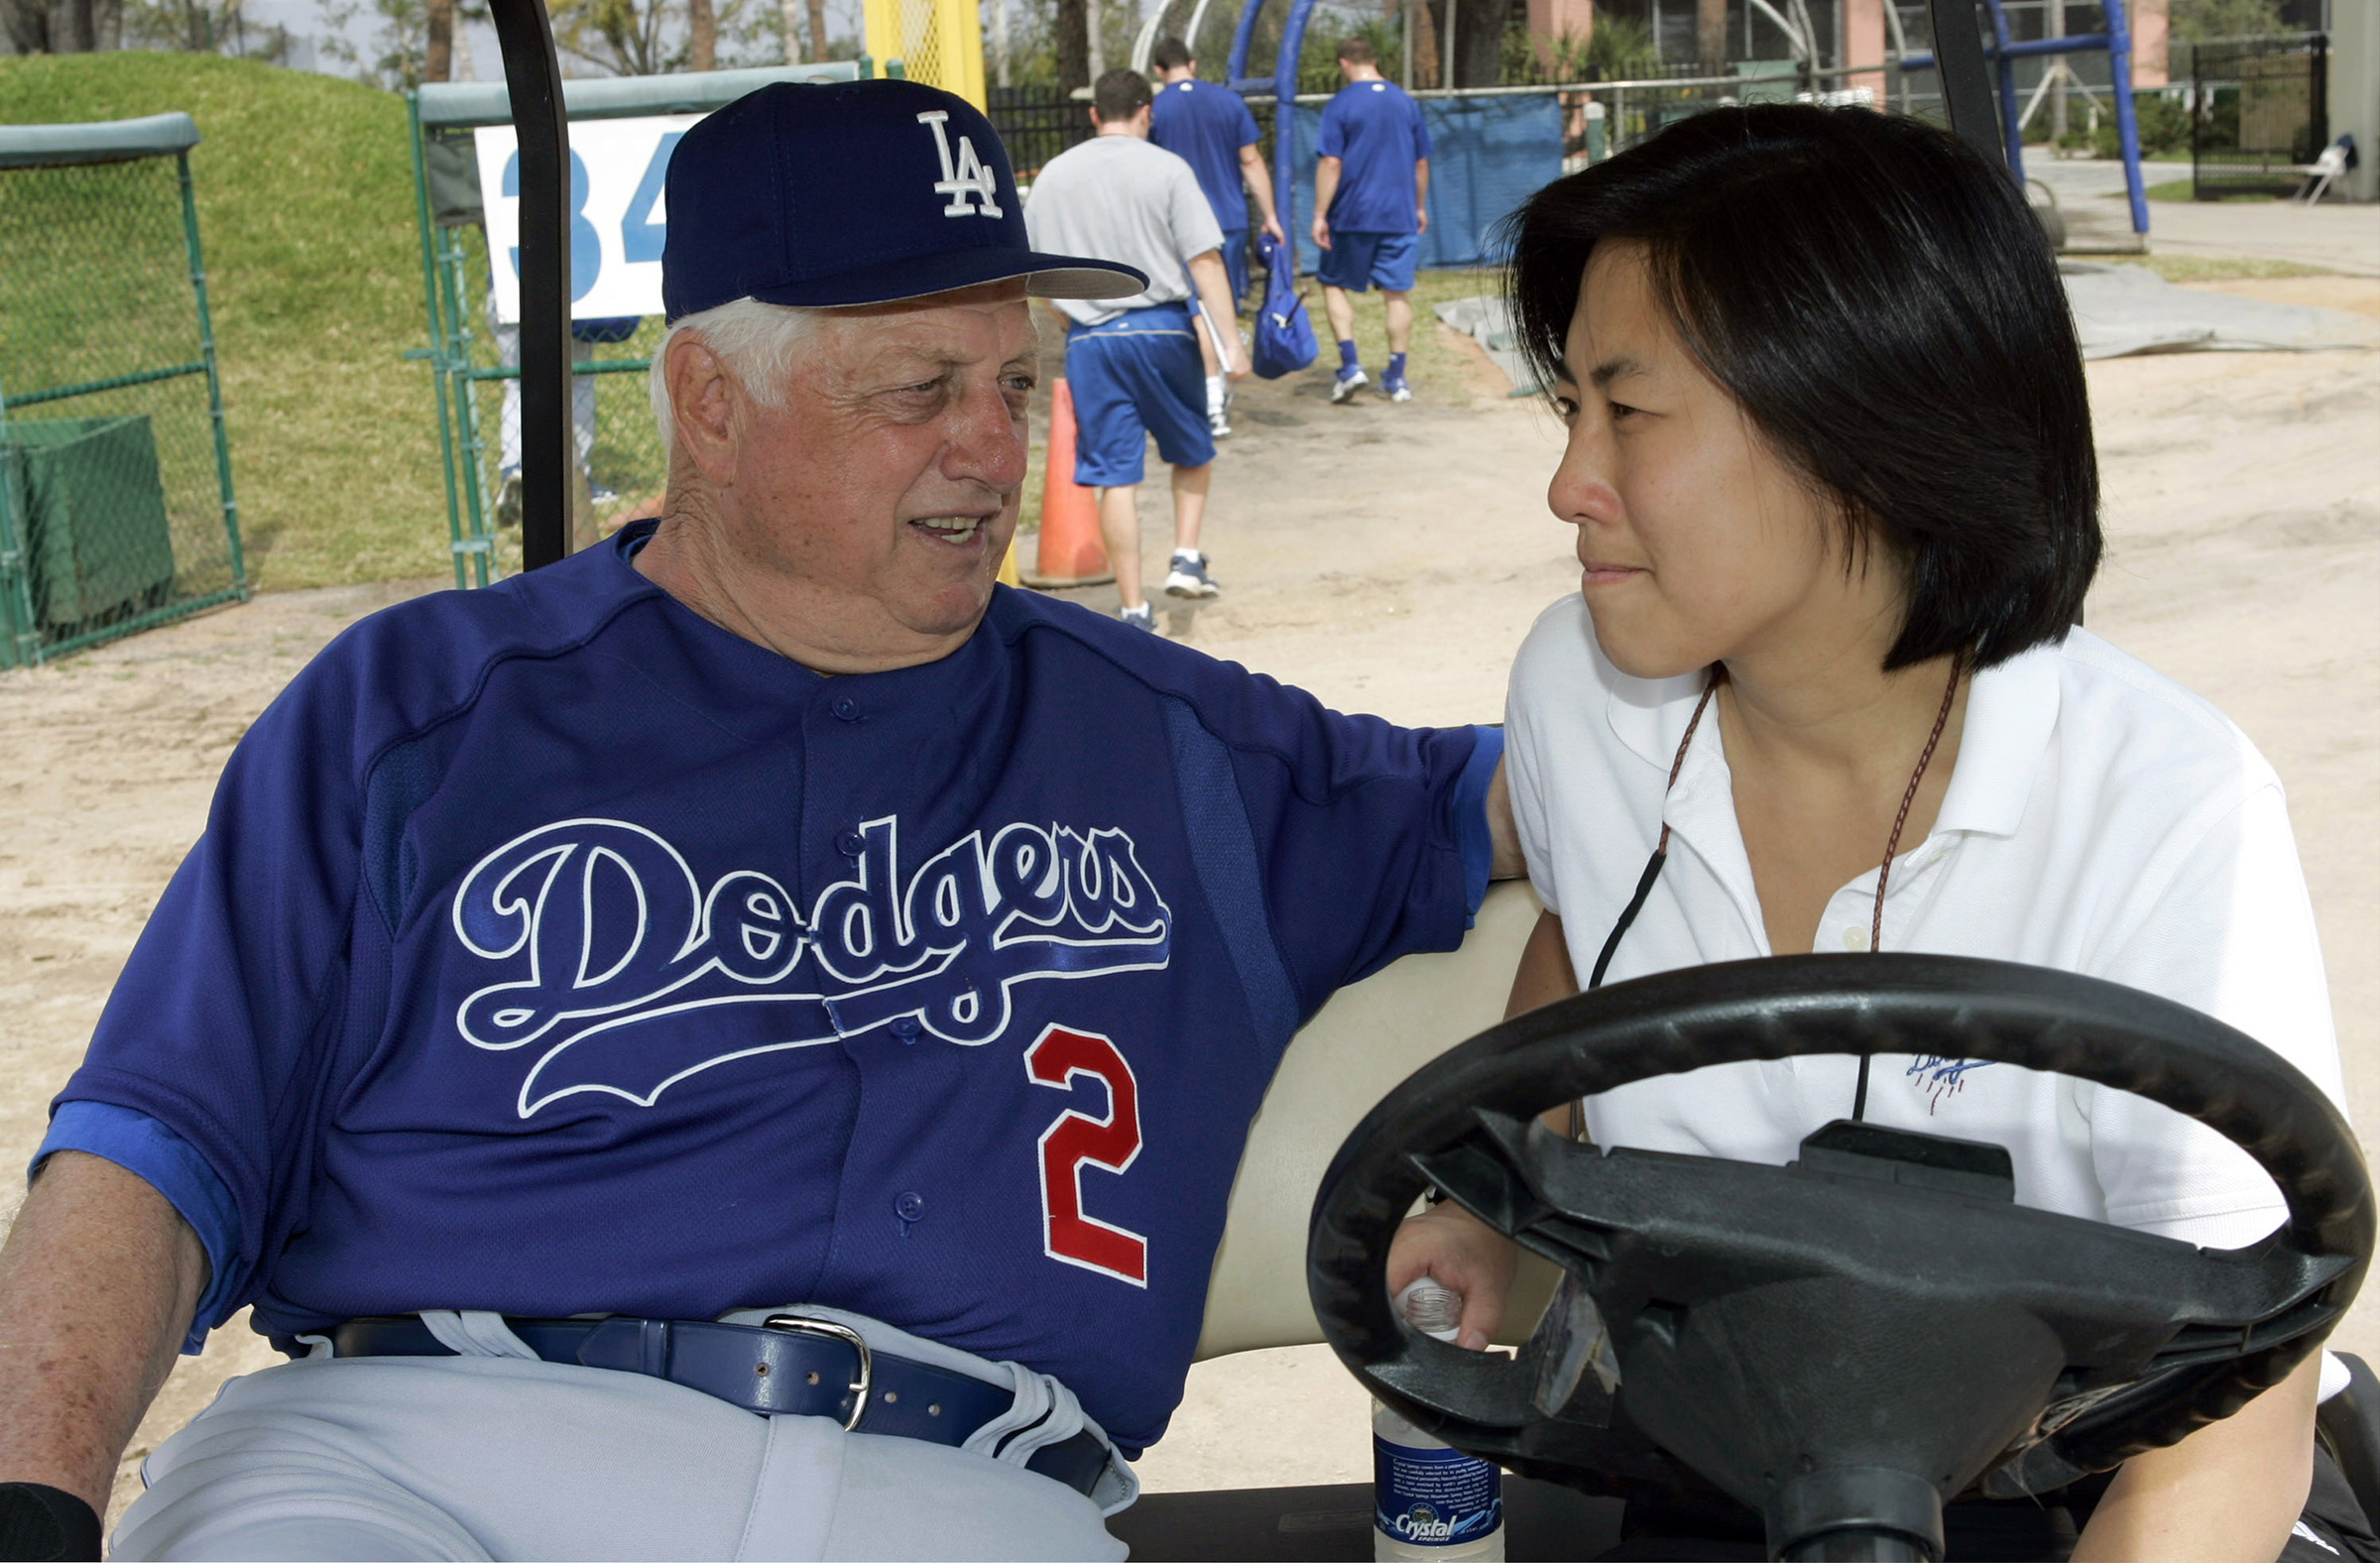 Ng with Tommy Lasorda in 2005 (Jon Soohoo—WireImage/getty images)